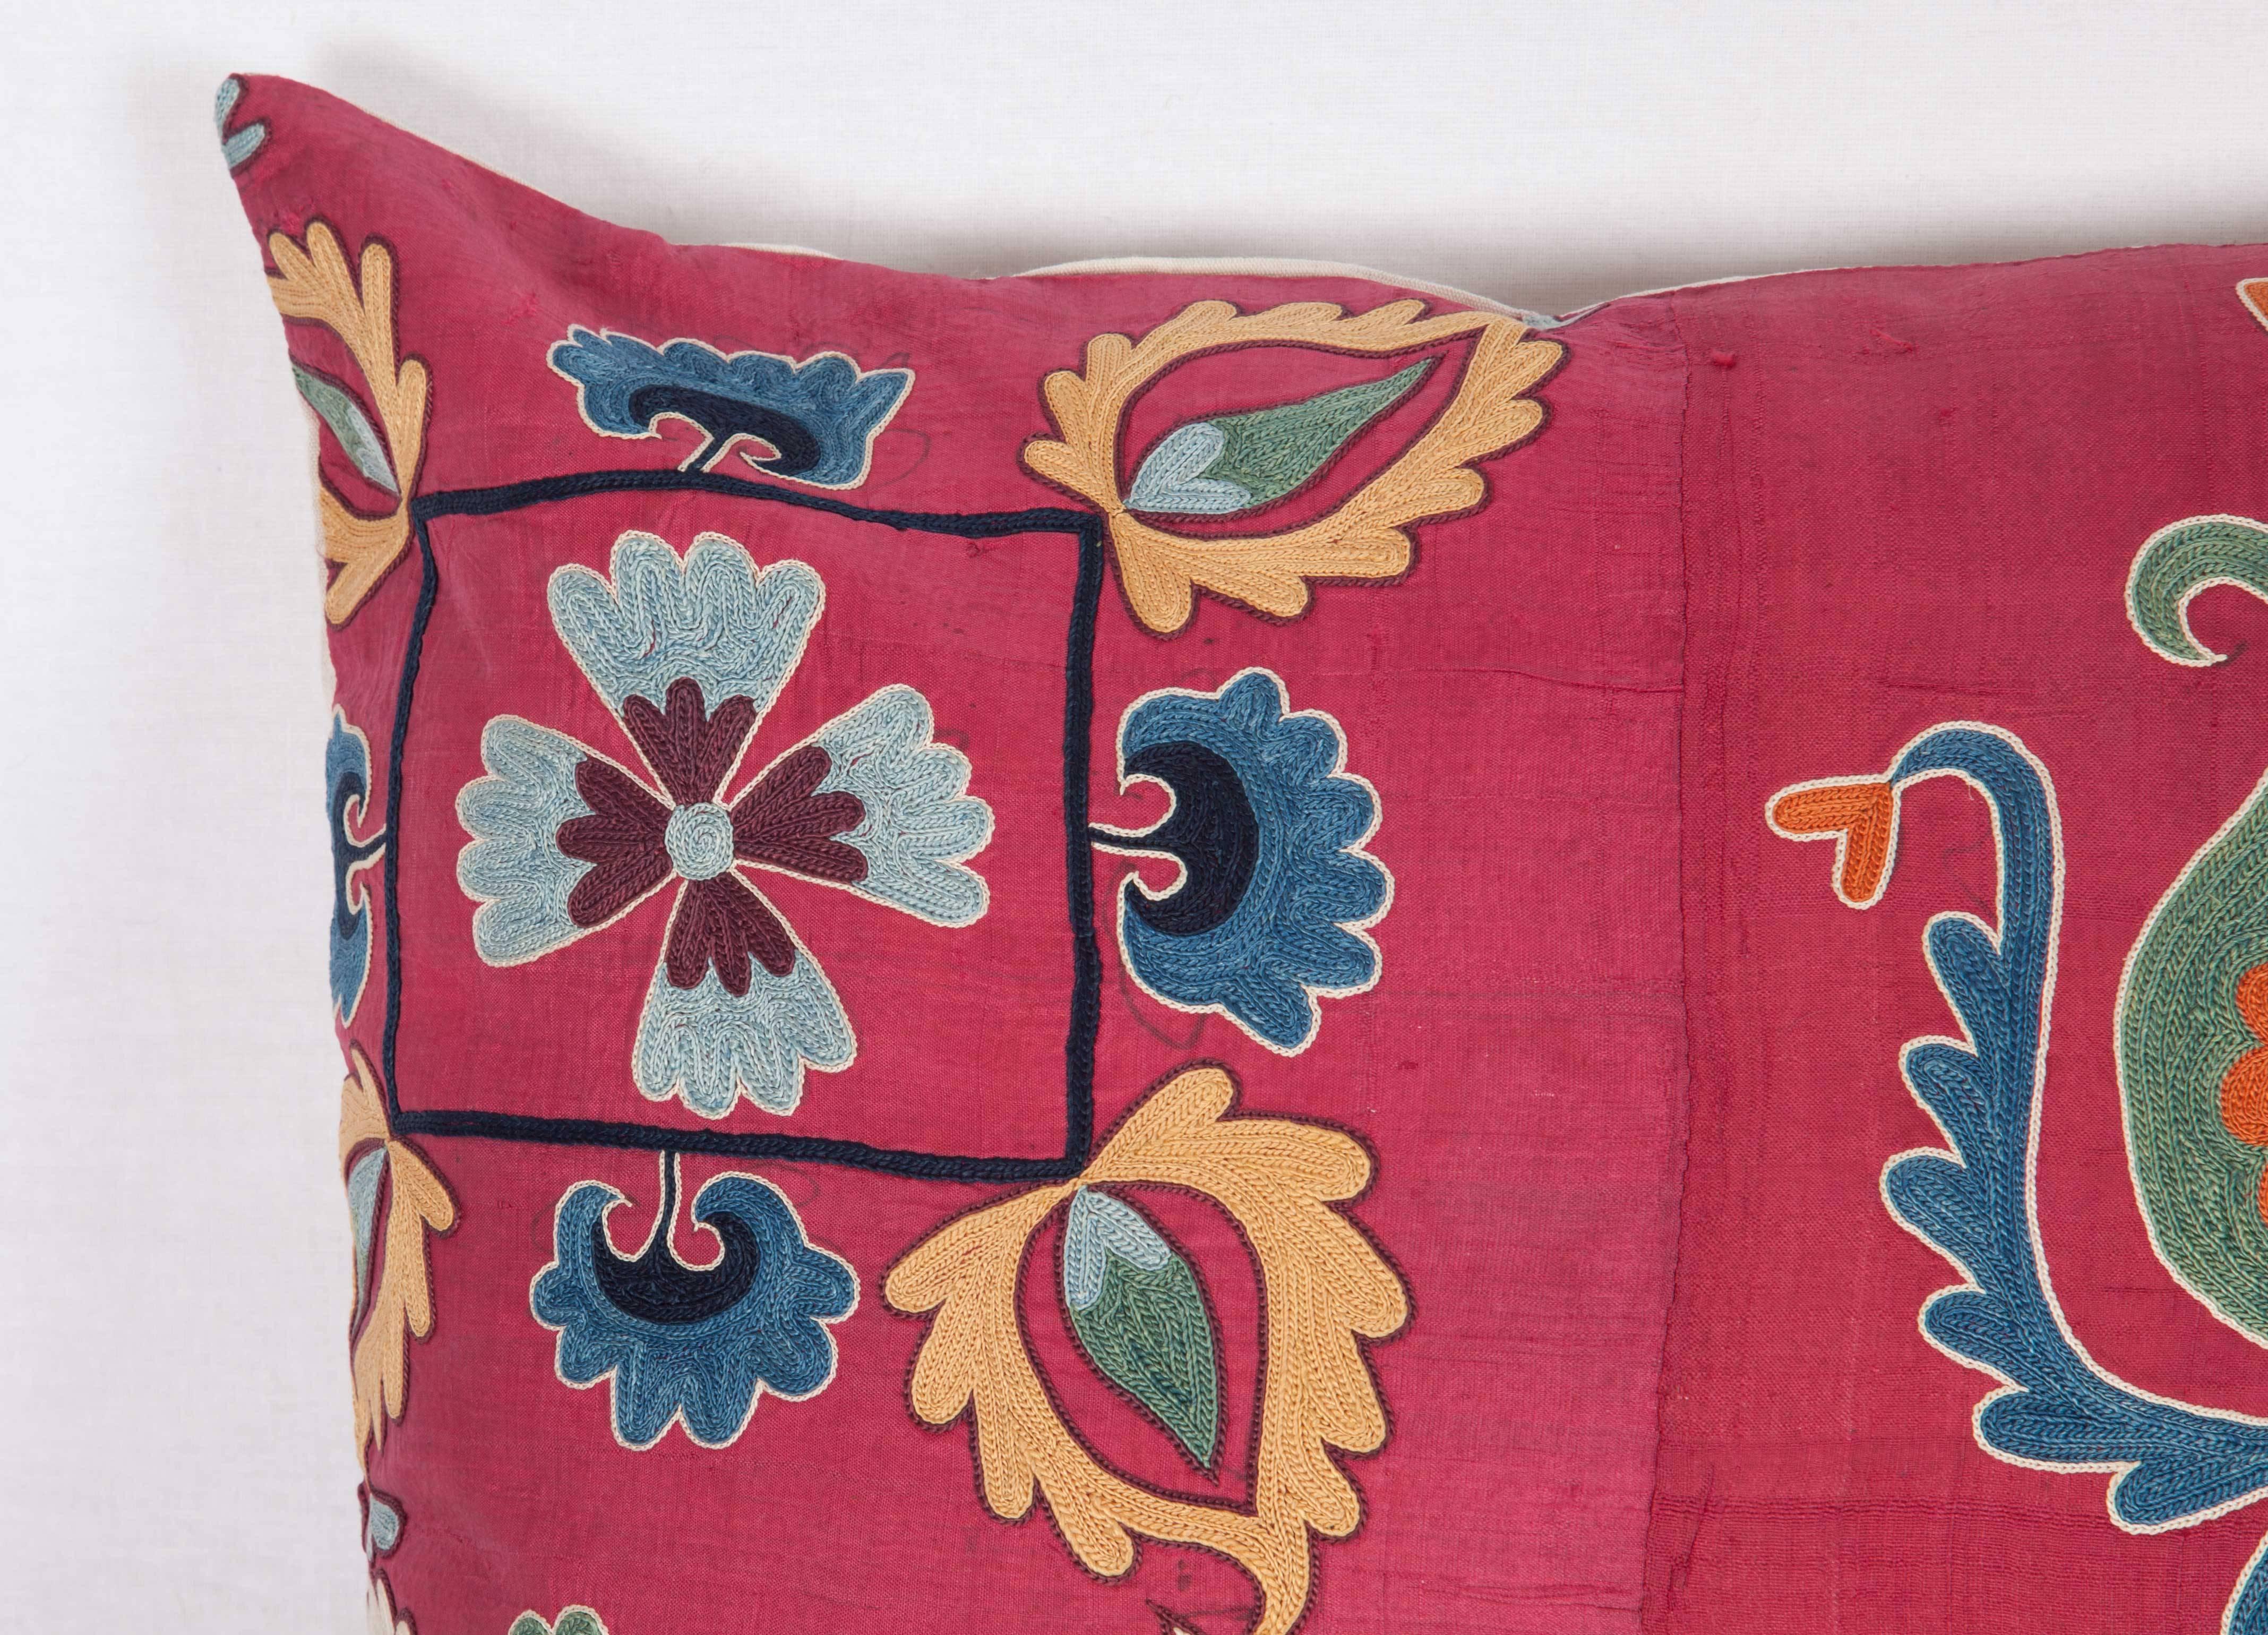 Uzbek Antique Pillow Case Fashioned from a Silk 19th Century Suzani